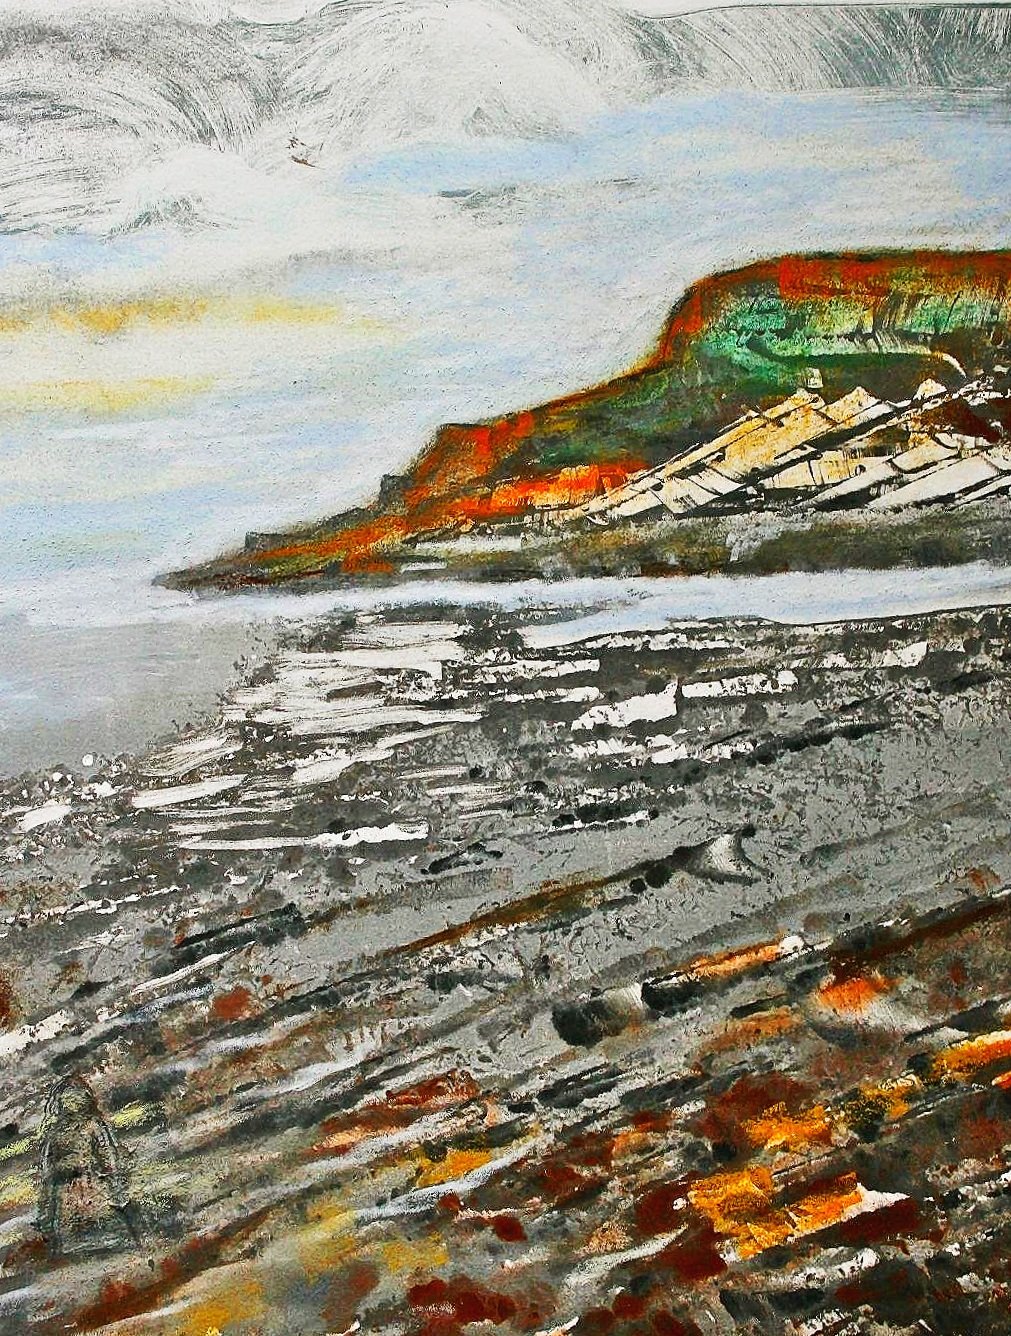 "Marwick Head I" by Susana Youngsteadt